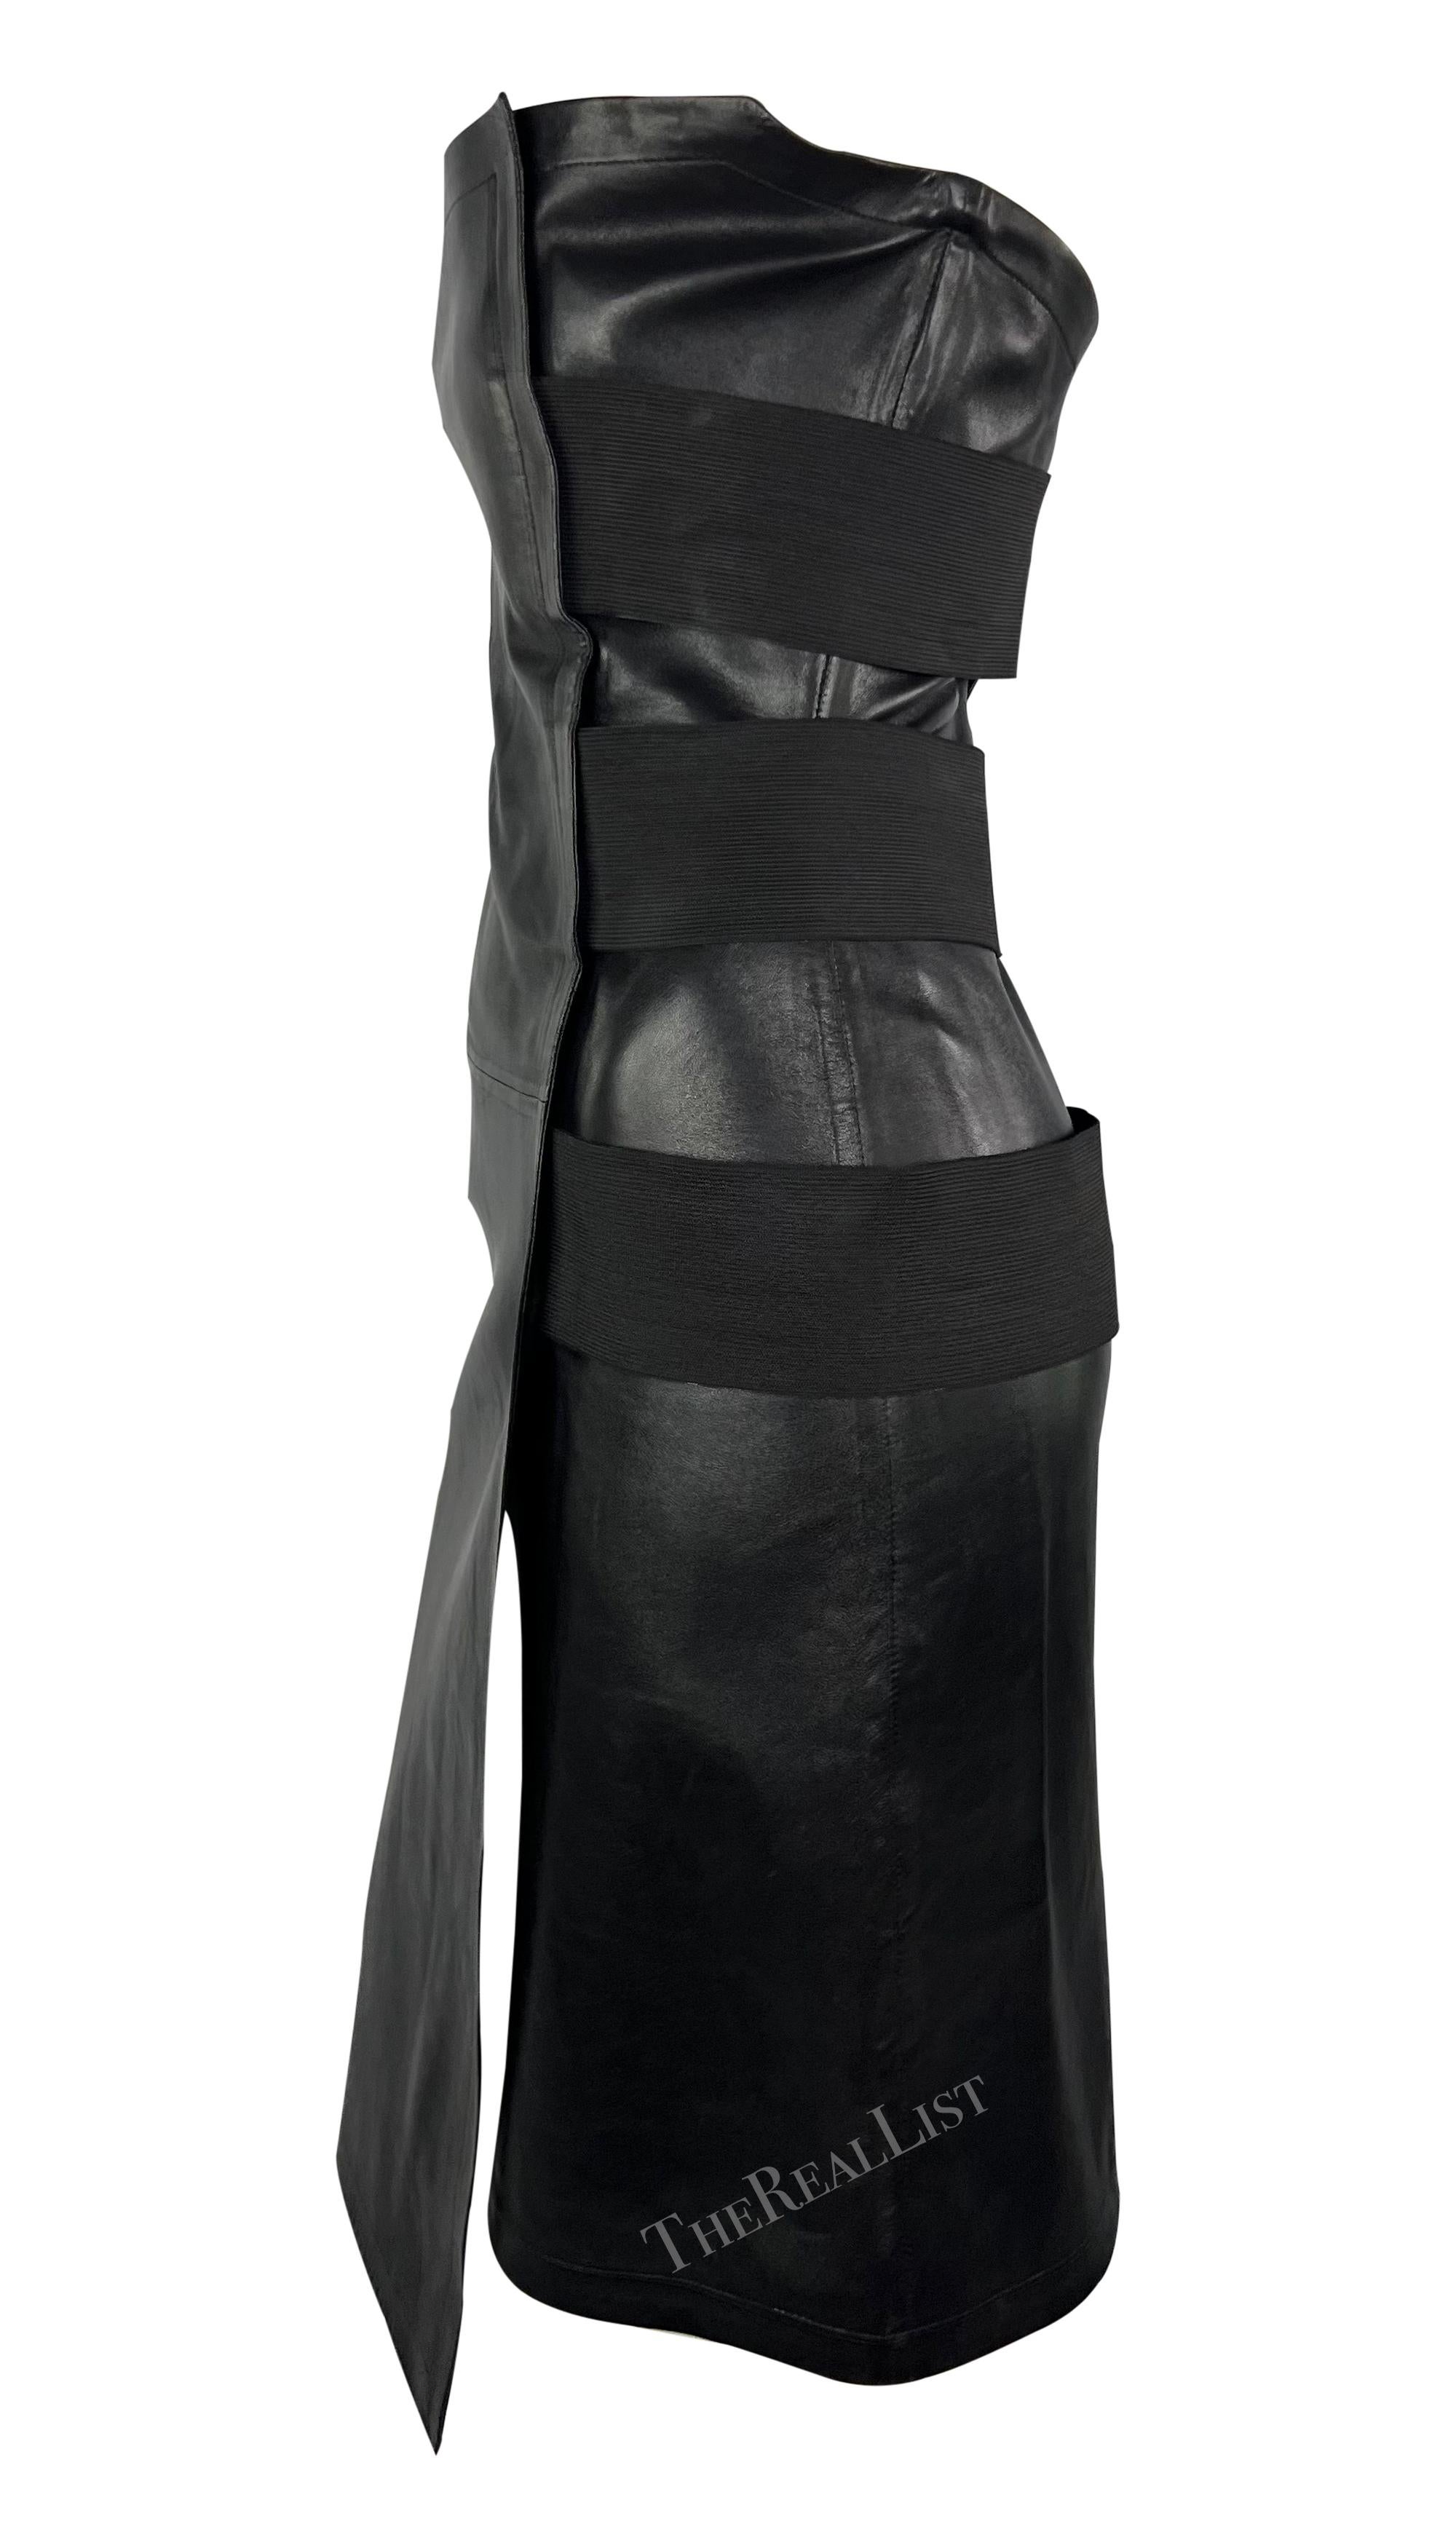 Presenting a fabulous black leather Yves Saint Laurent mini dress, designed by Tom Ford. From the Spring/Summer 2001 collection, this chic strapless dress is constructed entirely of black leather and wraps around the body, secured with large elastic